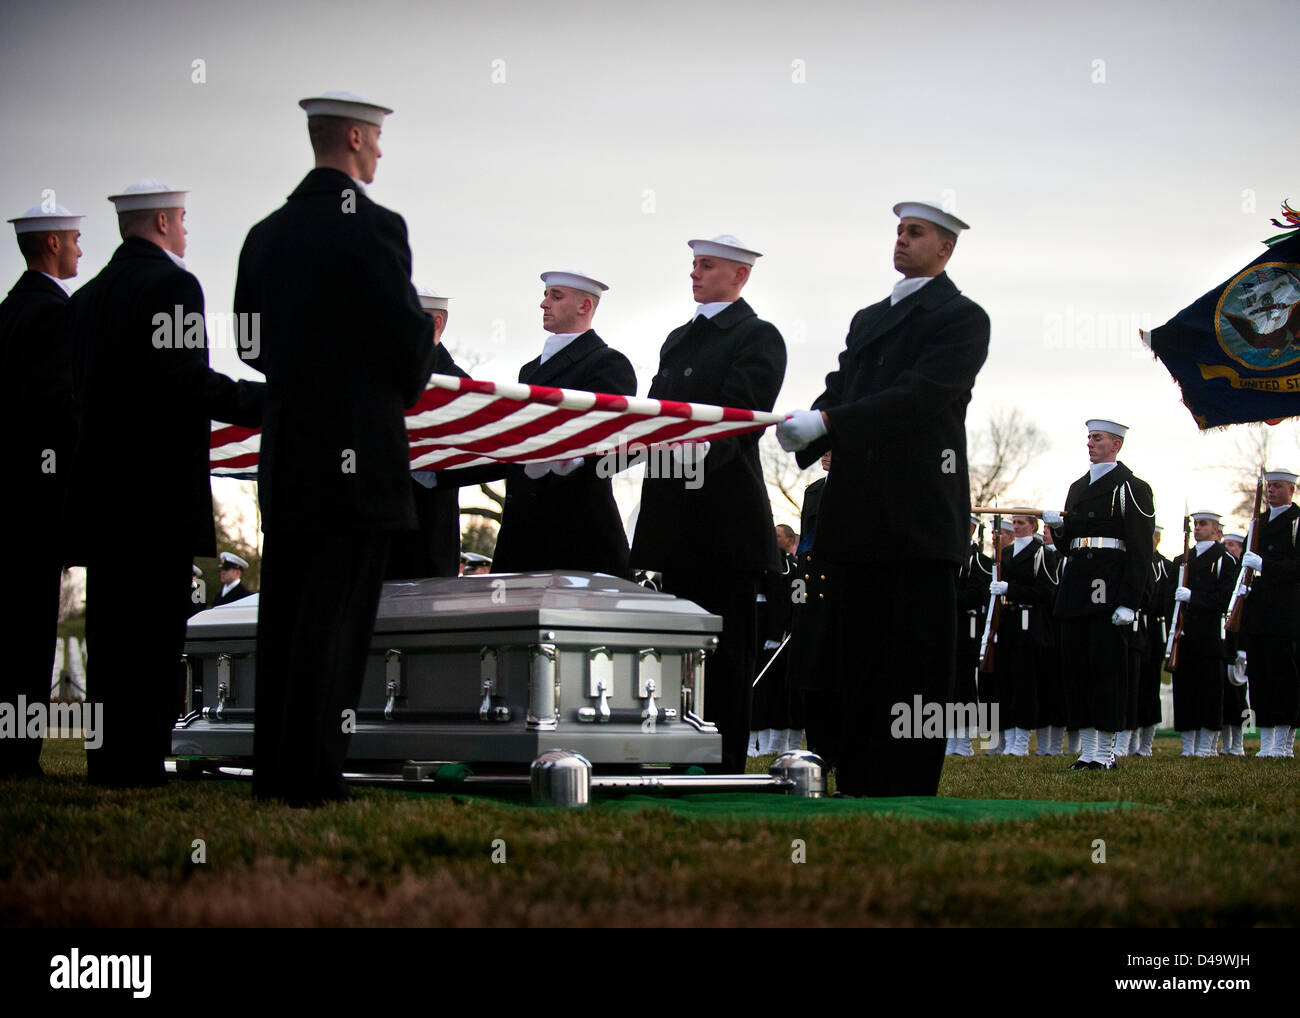 Members of the US Navy Ceremonial Guard escort the caskets during the funeral with full military honors for two Sailors recovered from the ironclad USS Monitor at Arlington National Cemetery  March 8, 2013 in Arlington, VA. The Monitor sank off Cape Hatteras, NC during the Civil War in 1862. Stock Photo